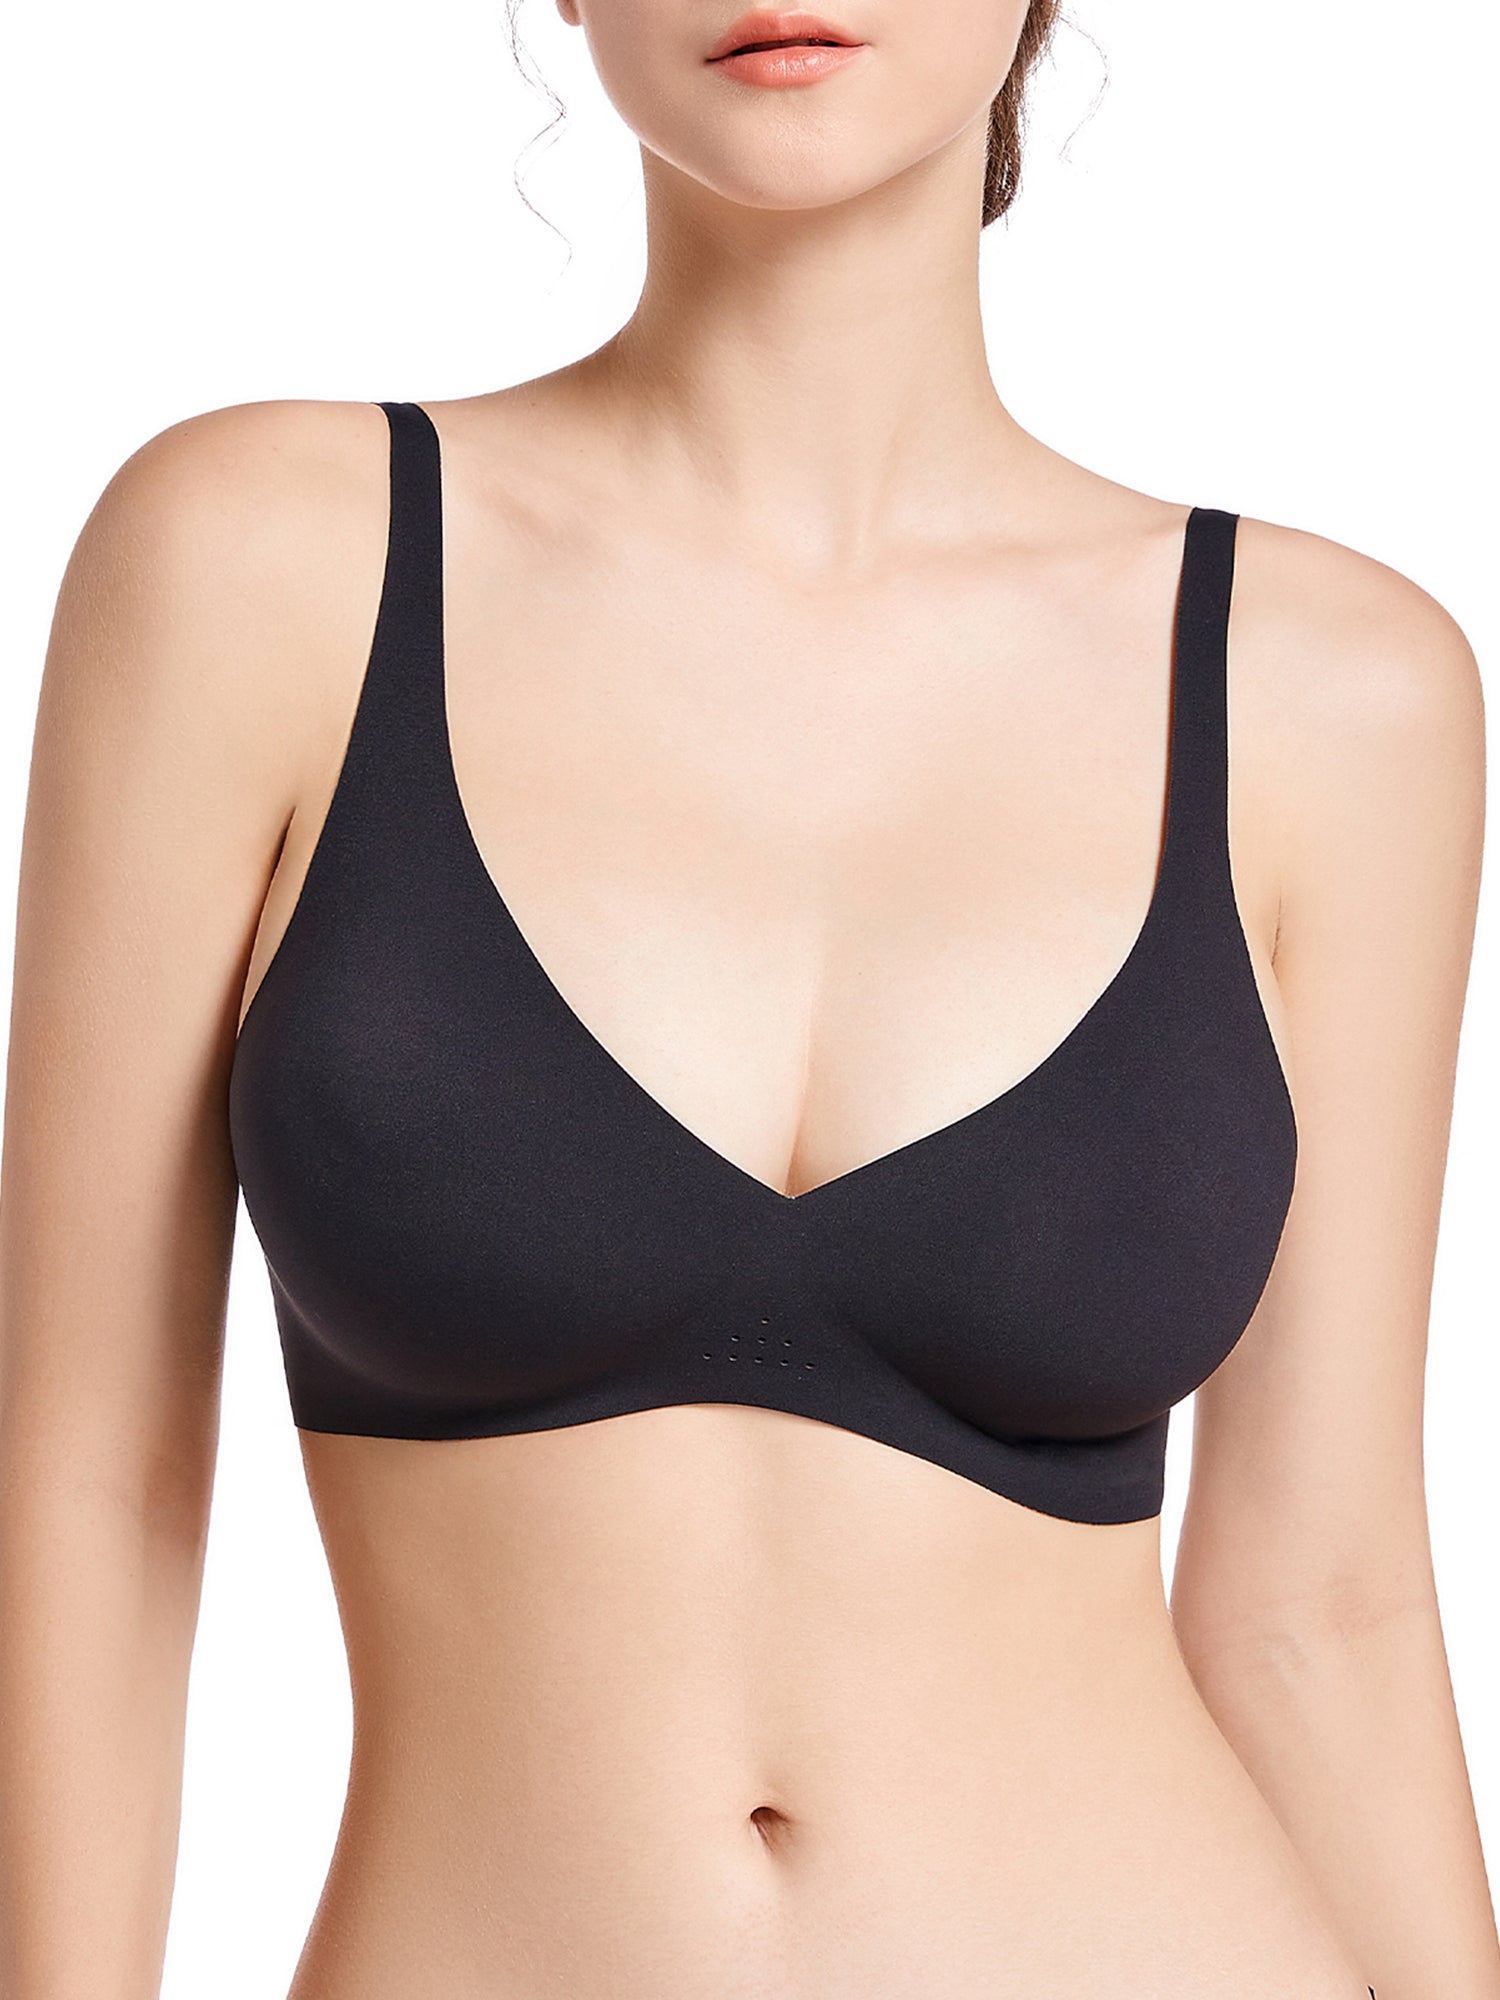 Comfortable Leisure Bras, Seamless Wire Free Everyday Bras, Soft And Thin  Bras For Women